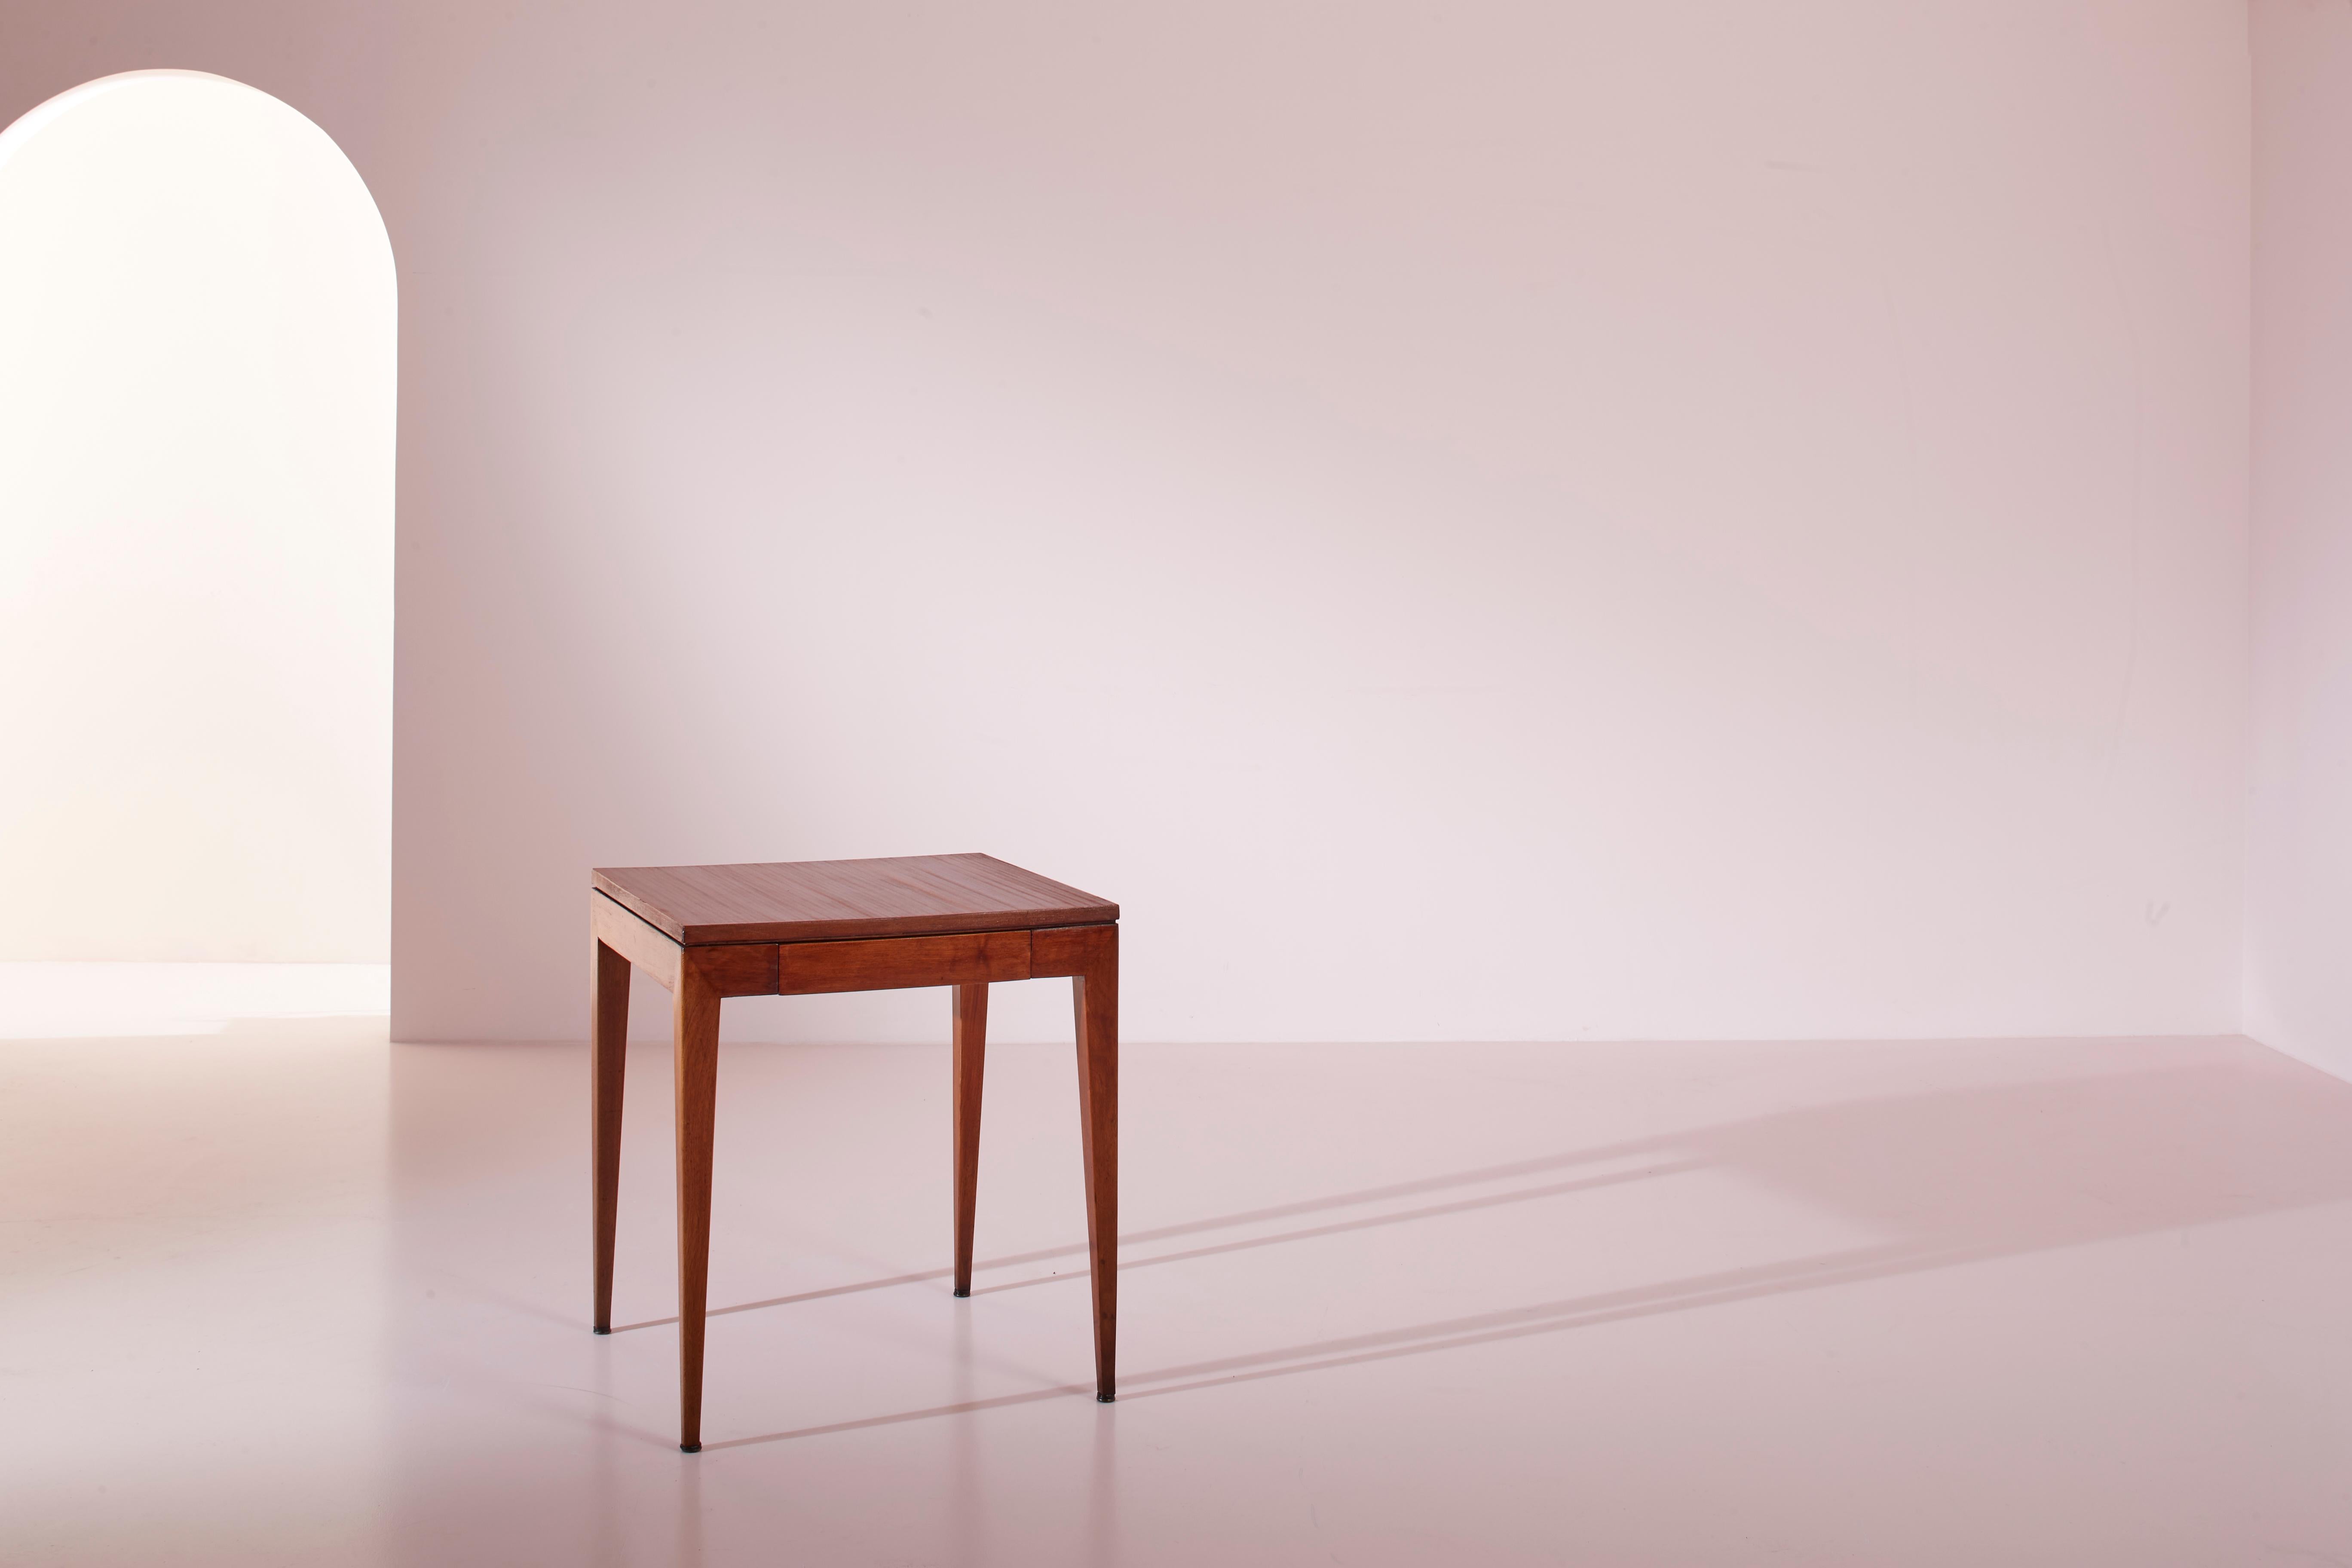 A side table in walnut designed by Gio Ponti, originating from the Hotel dei Cavalieri in Milan.

This refined side table is a prestigious piece of furniture conceived by Gio Ponti for the interiors of the Hotel dei Cavalieri in Milan. This